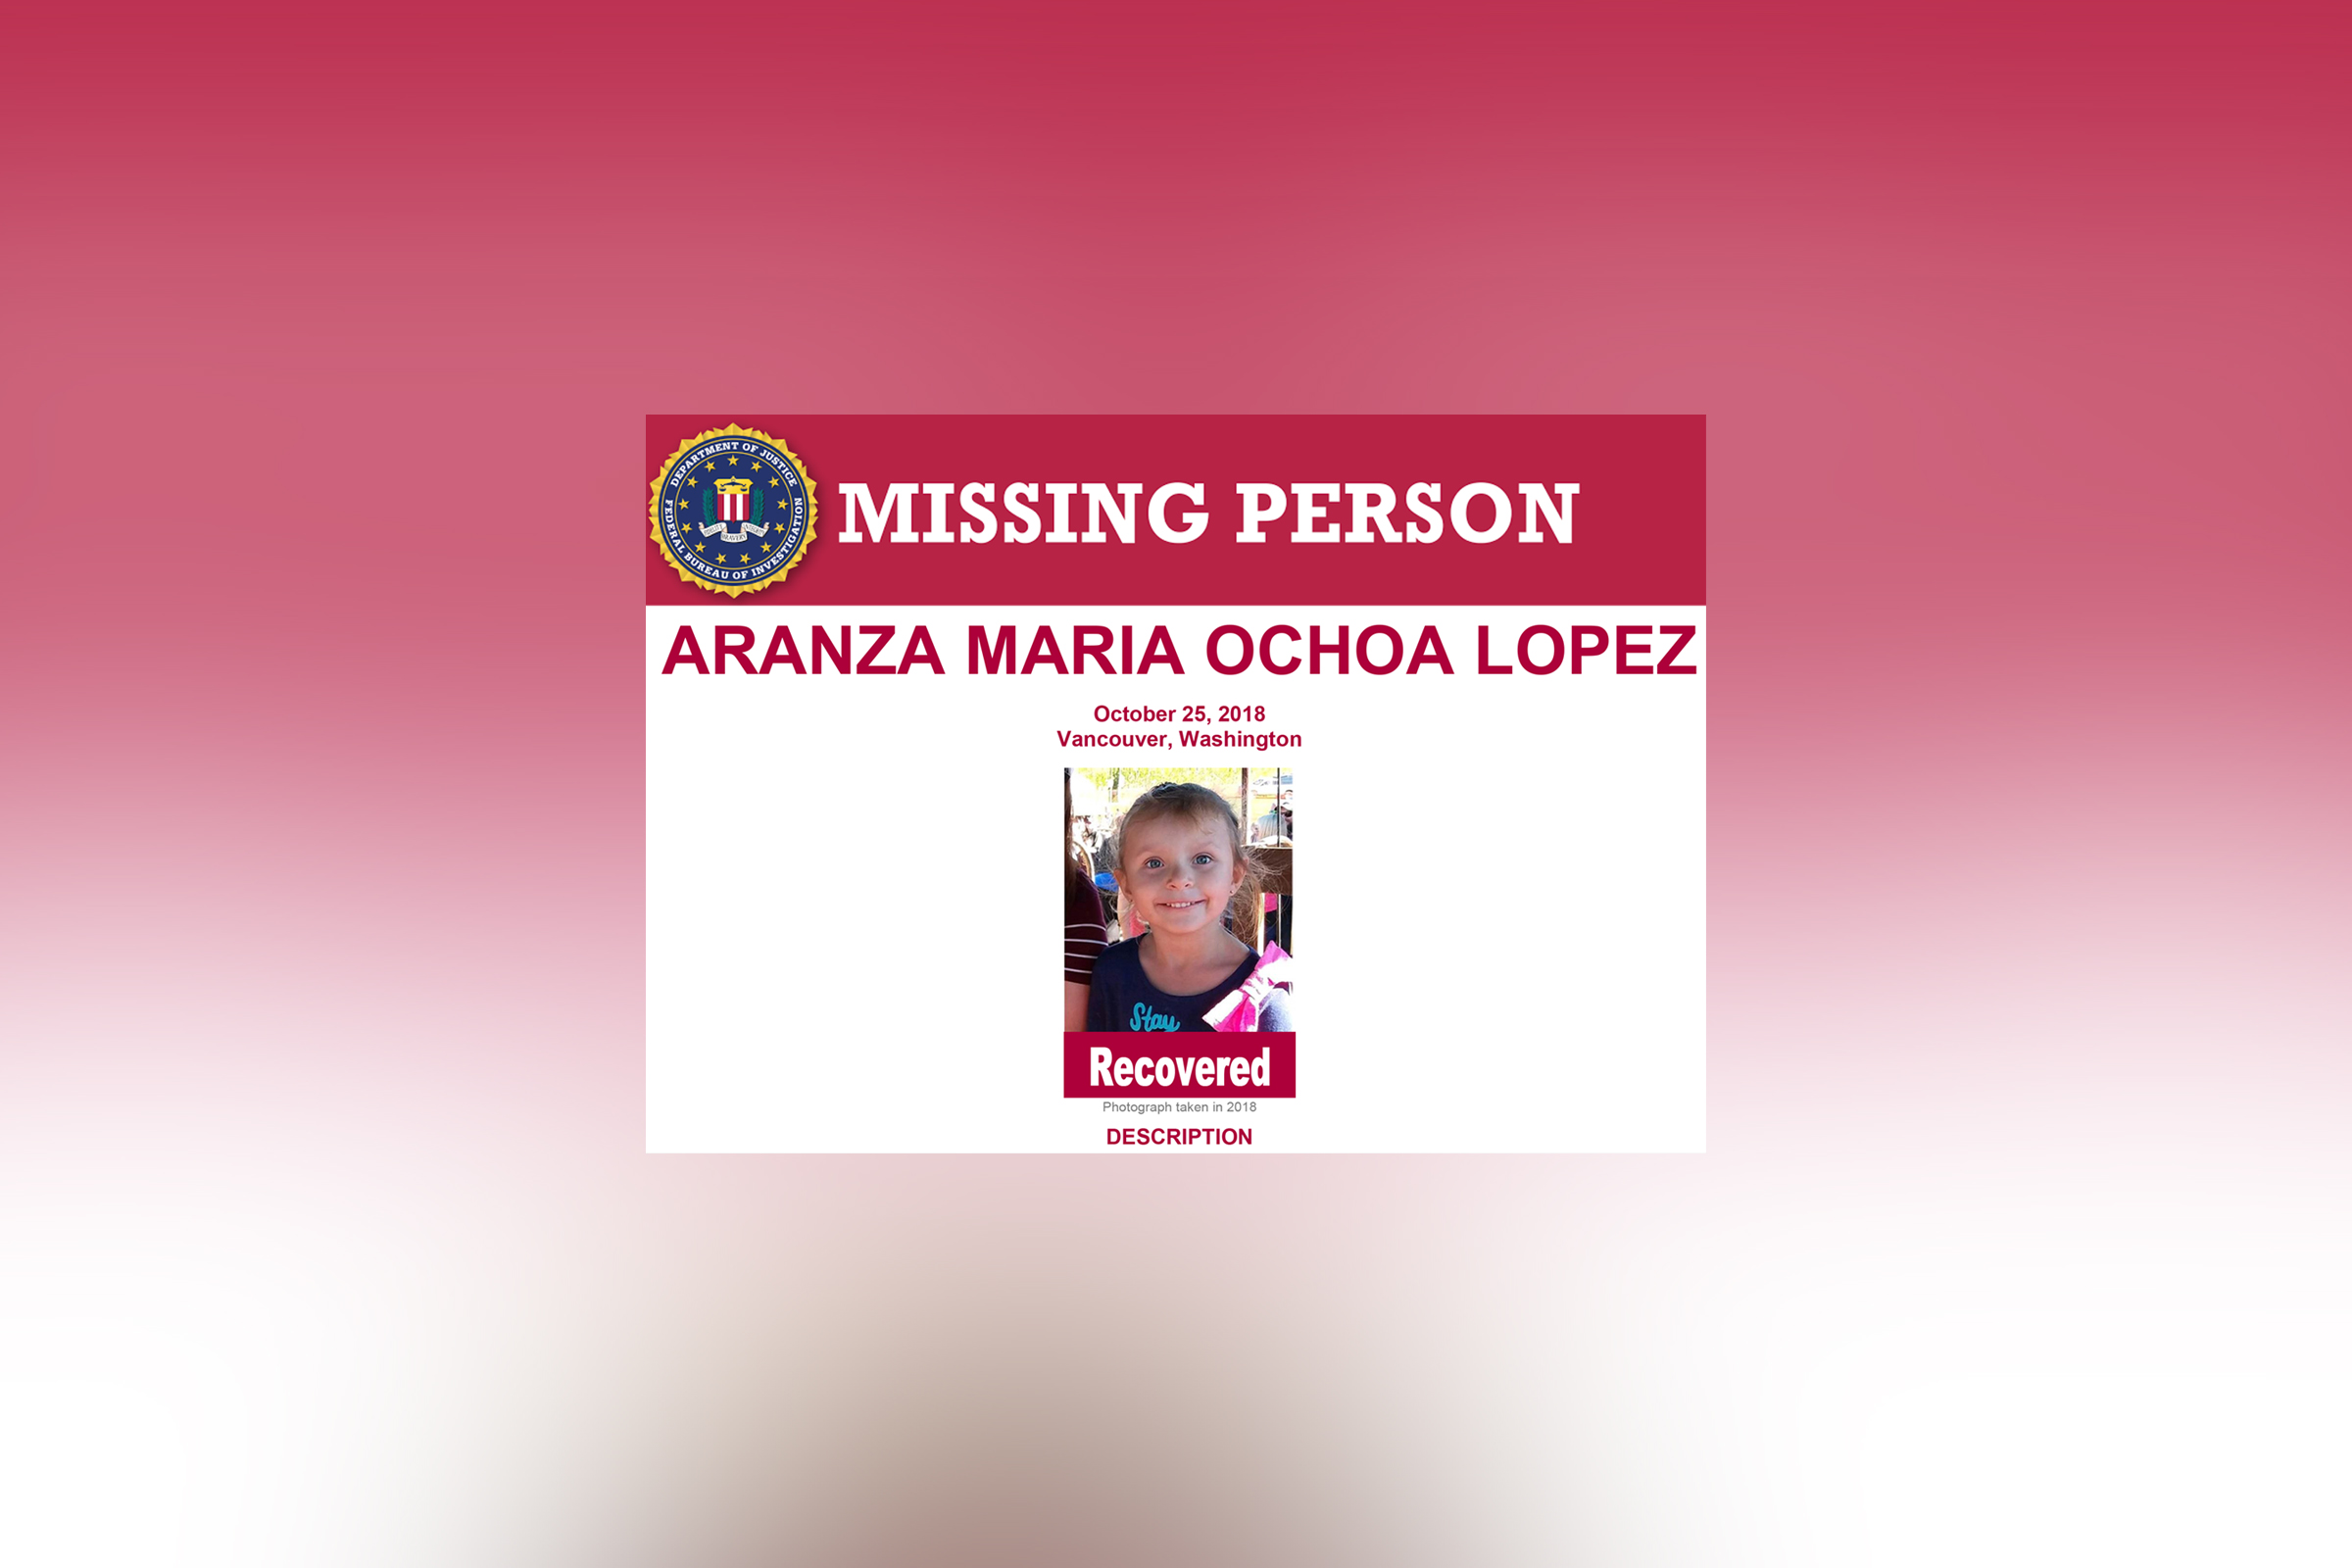 PHOTO: Aranza Maria Ochoa Lopez, who had been missing since 2018, was recently found in Mexico, the FBI said.